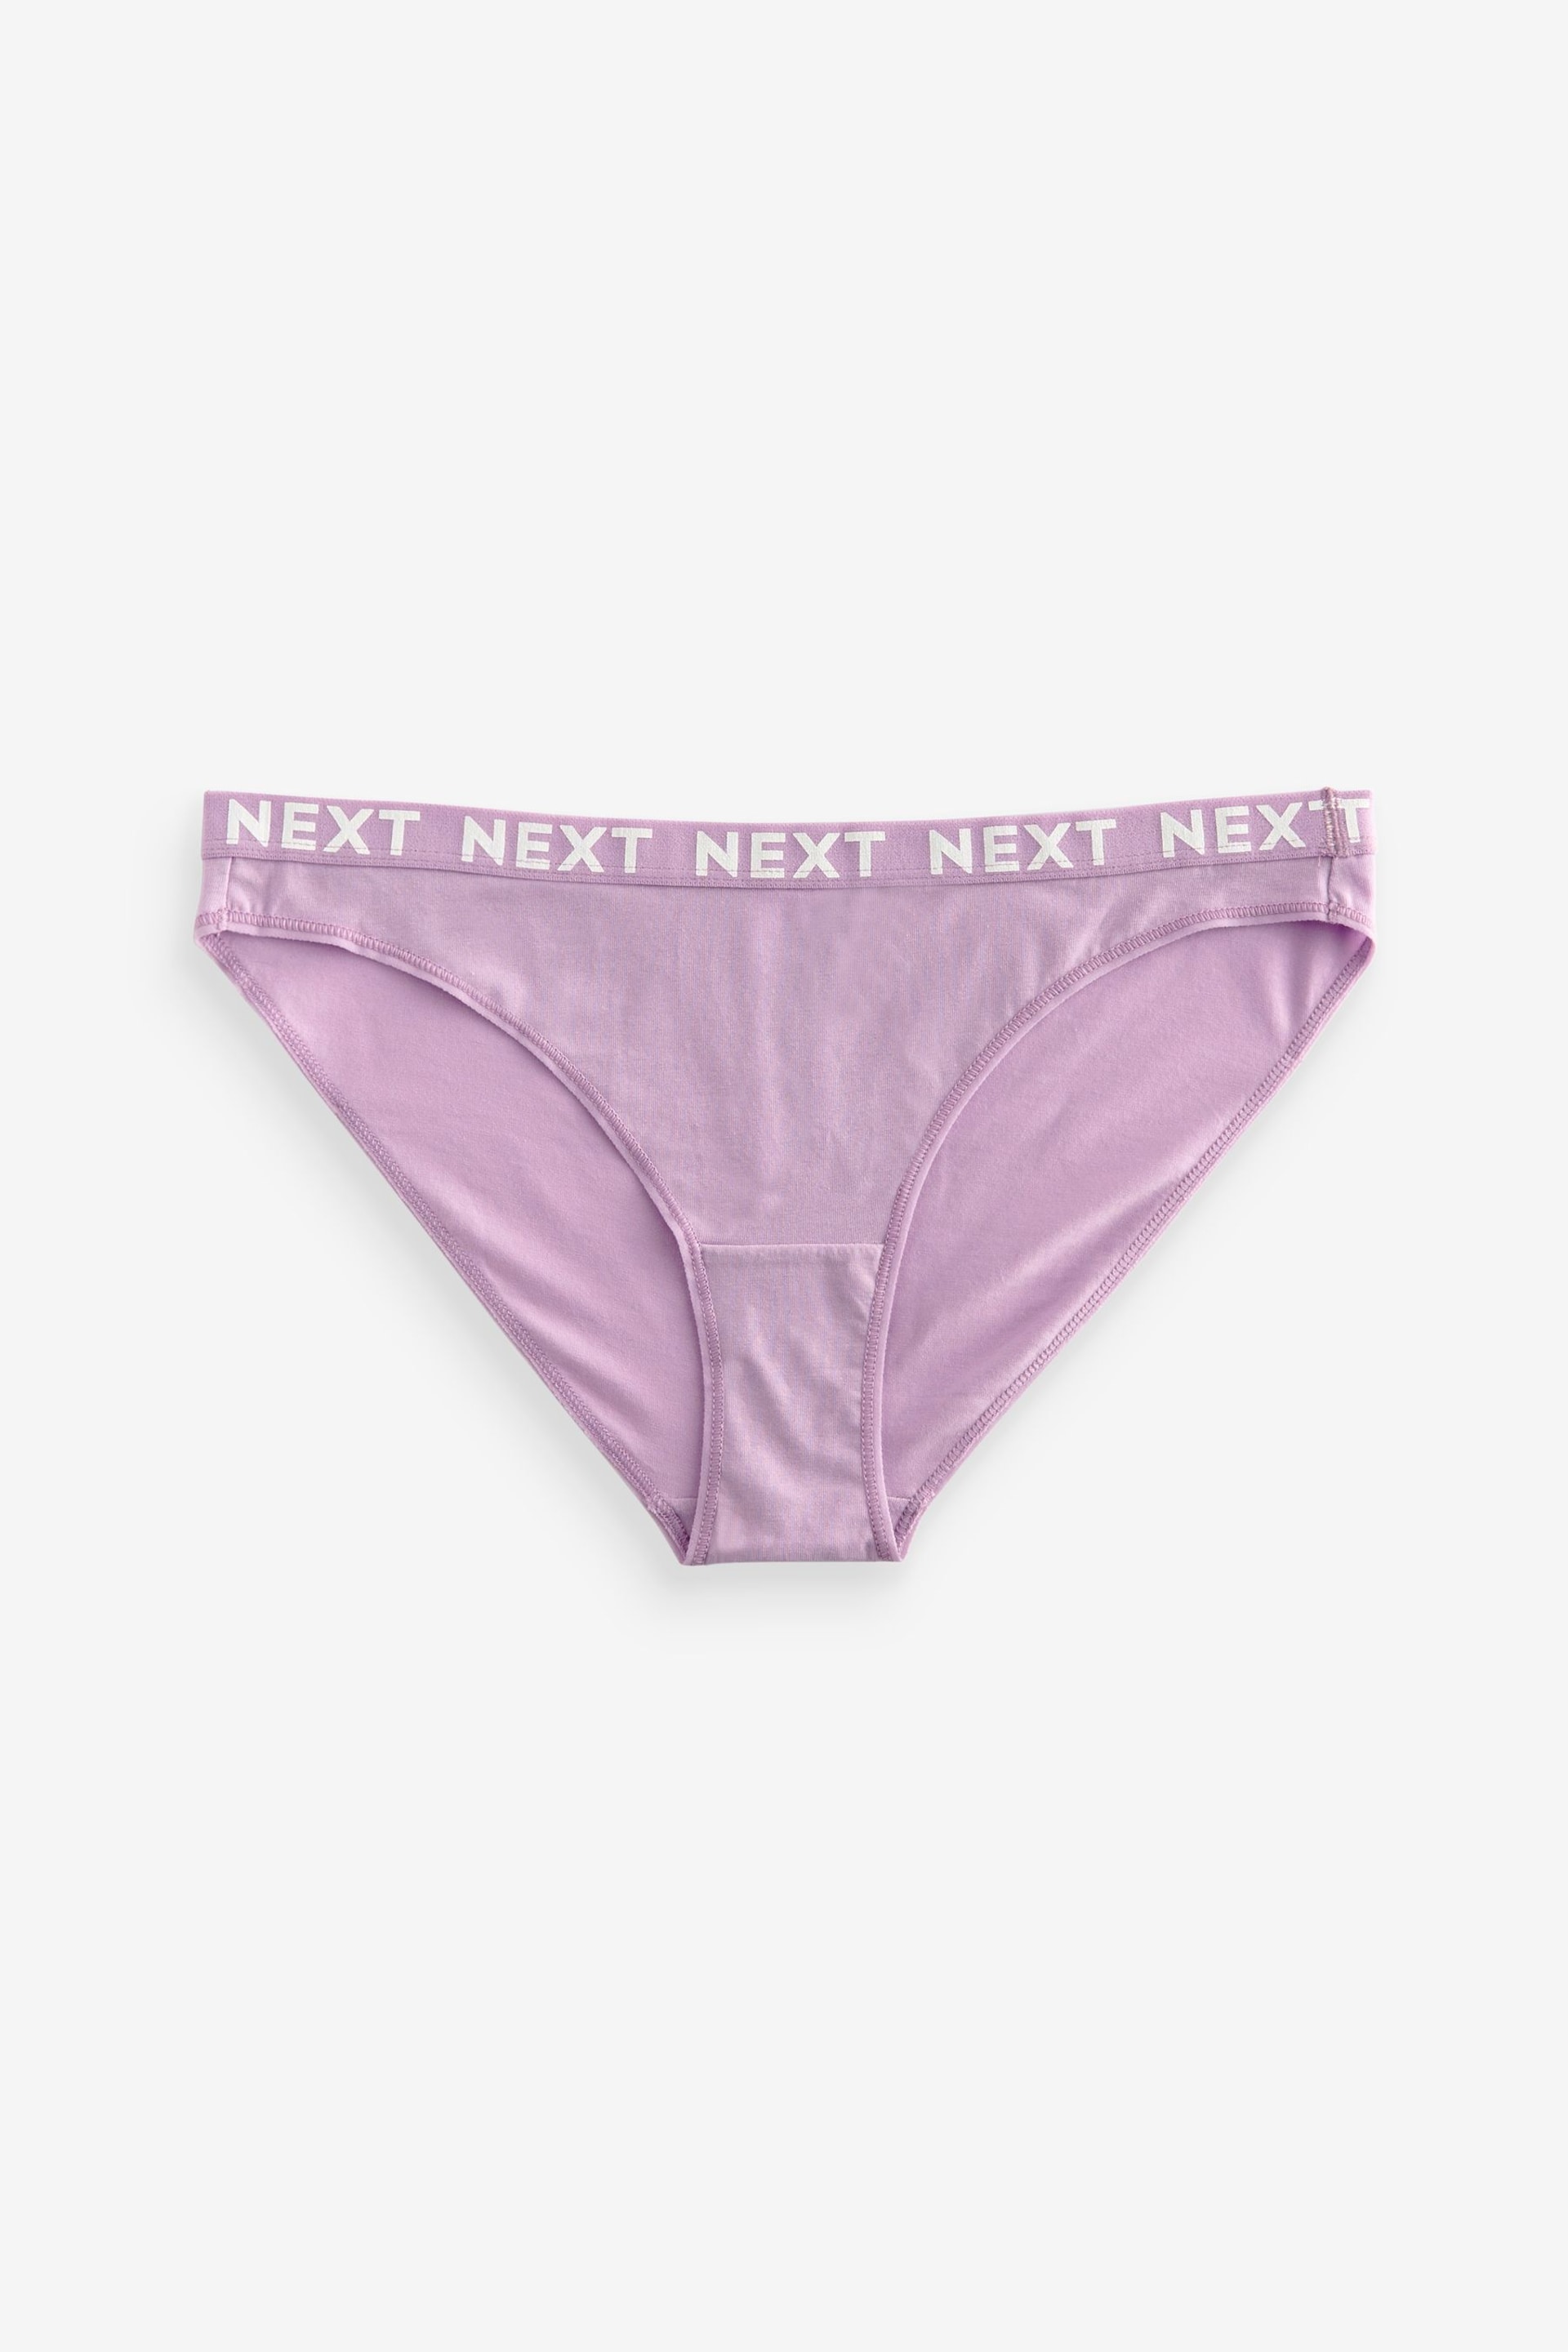 Pastel Colours High Leg Cotton Rich Logo Knickers 4 Pack - Image 8 of 10